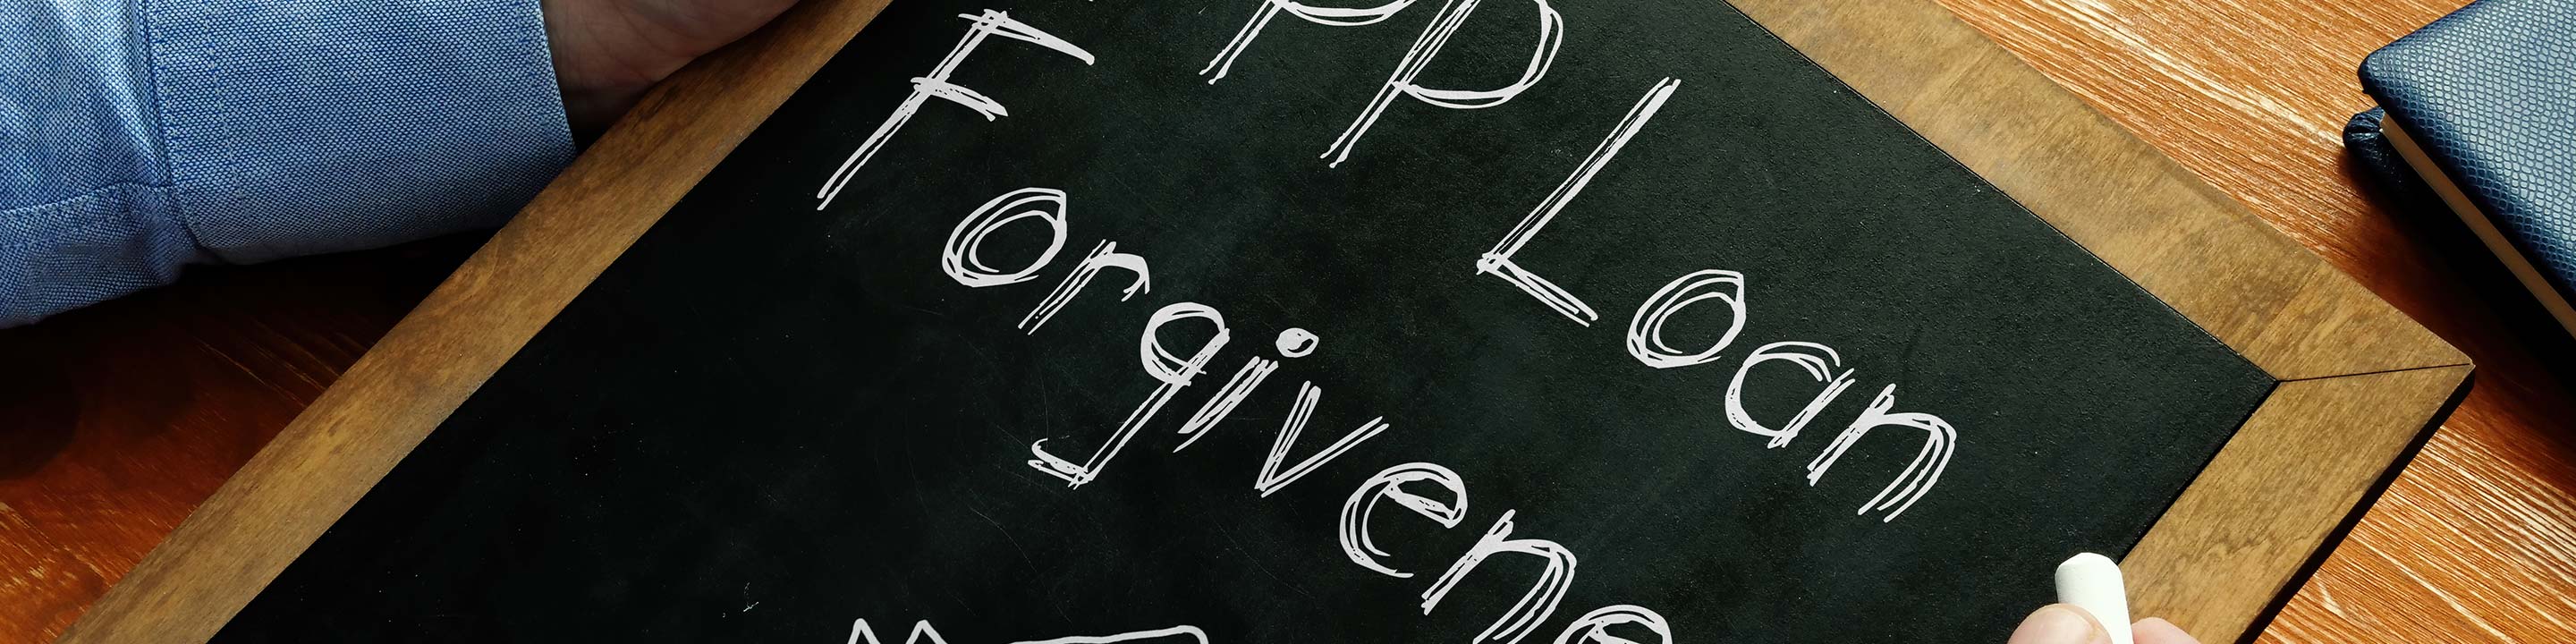 PPP Loan & Forgiveness for Nonprofits